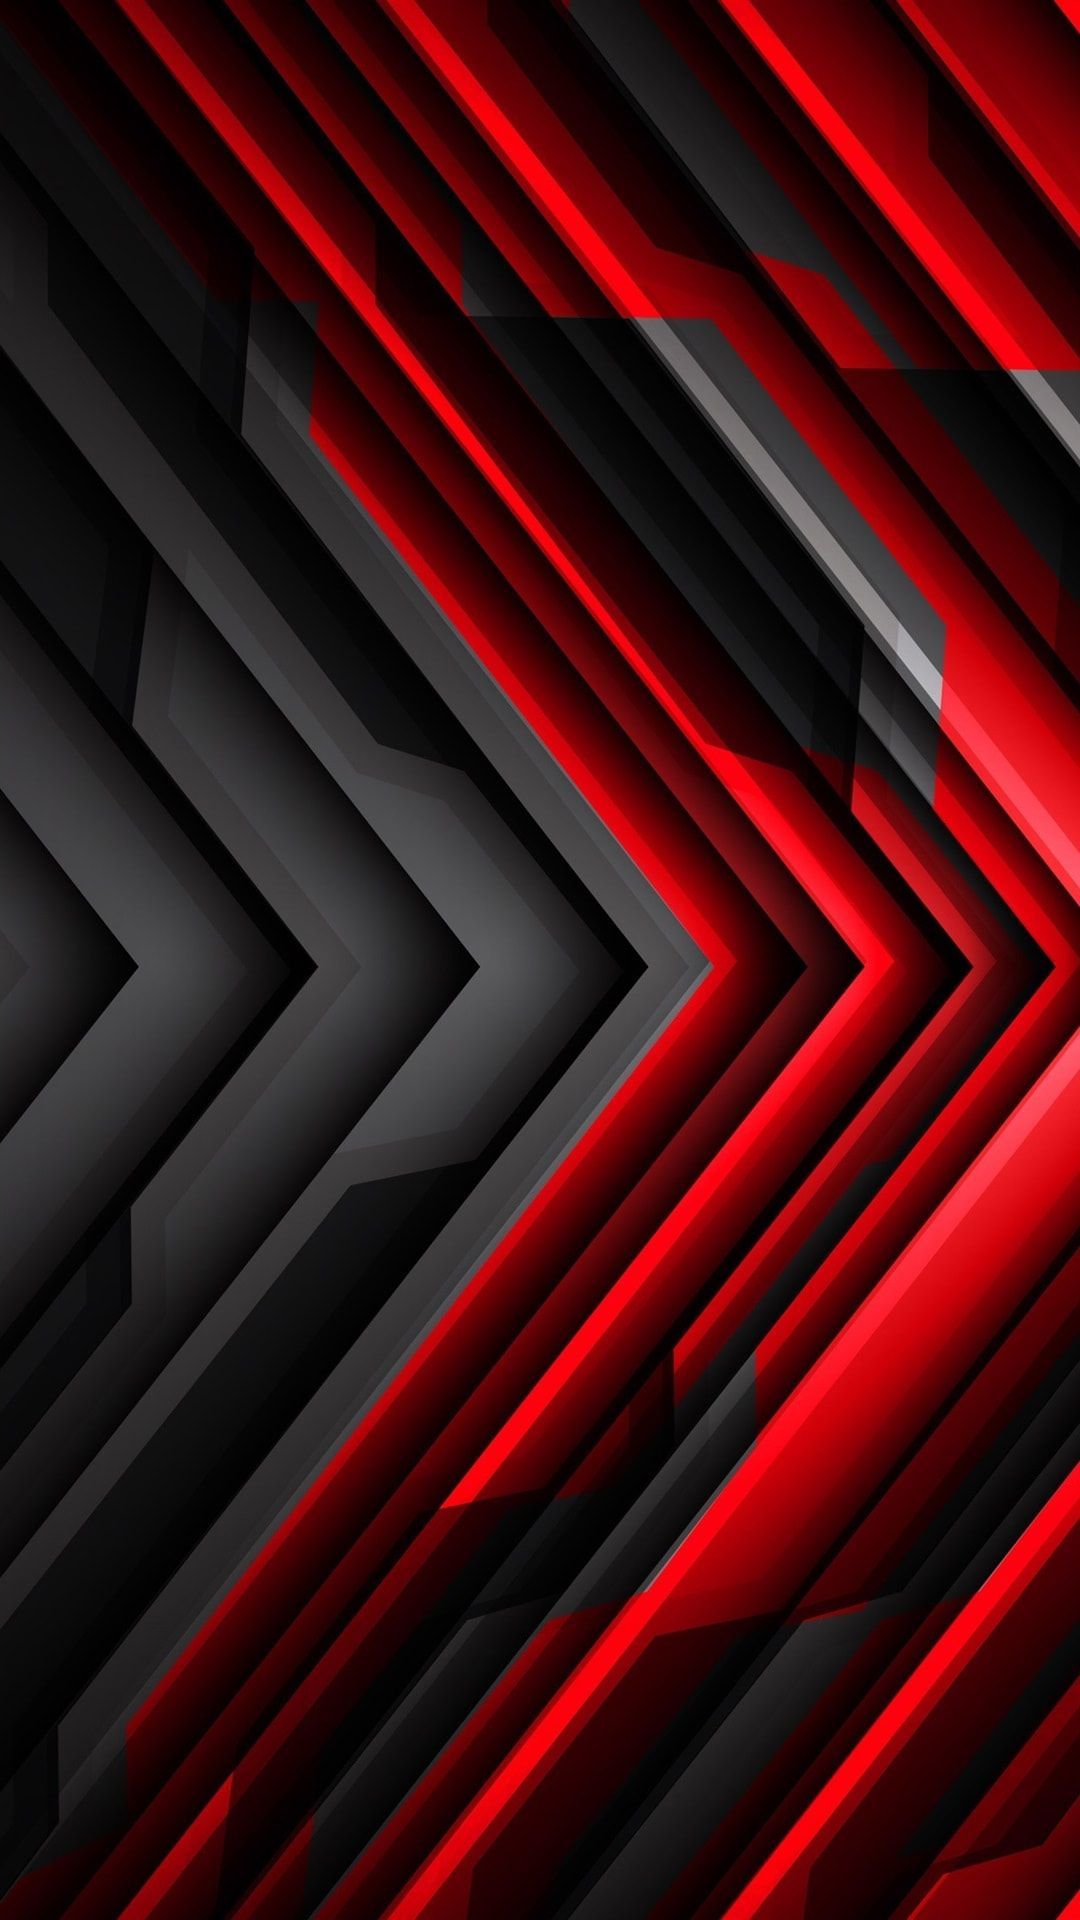 Abstract Red And Grey Wallpaper Android. Grey wallpaper android, Abstract, Red image